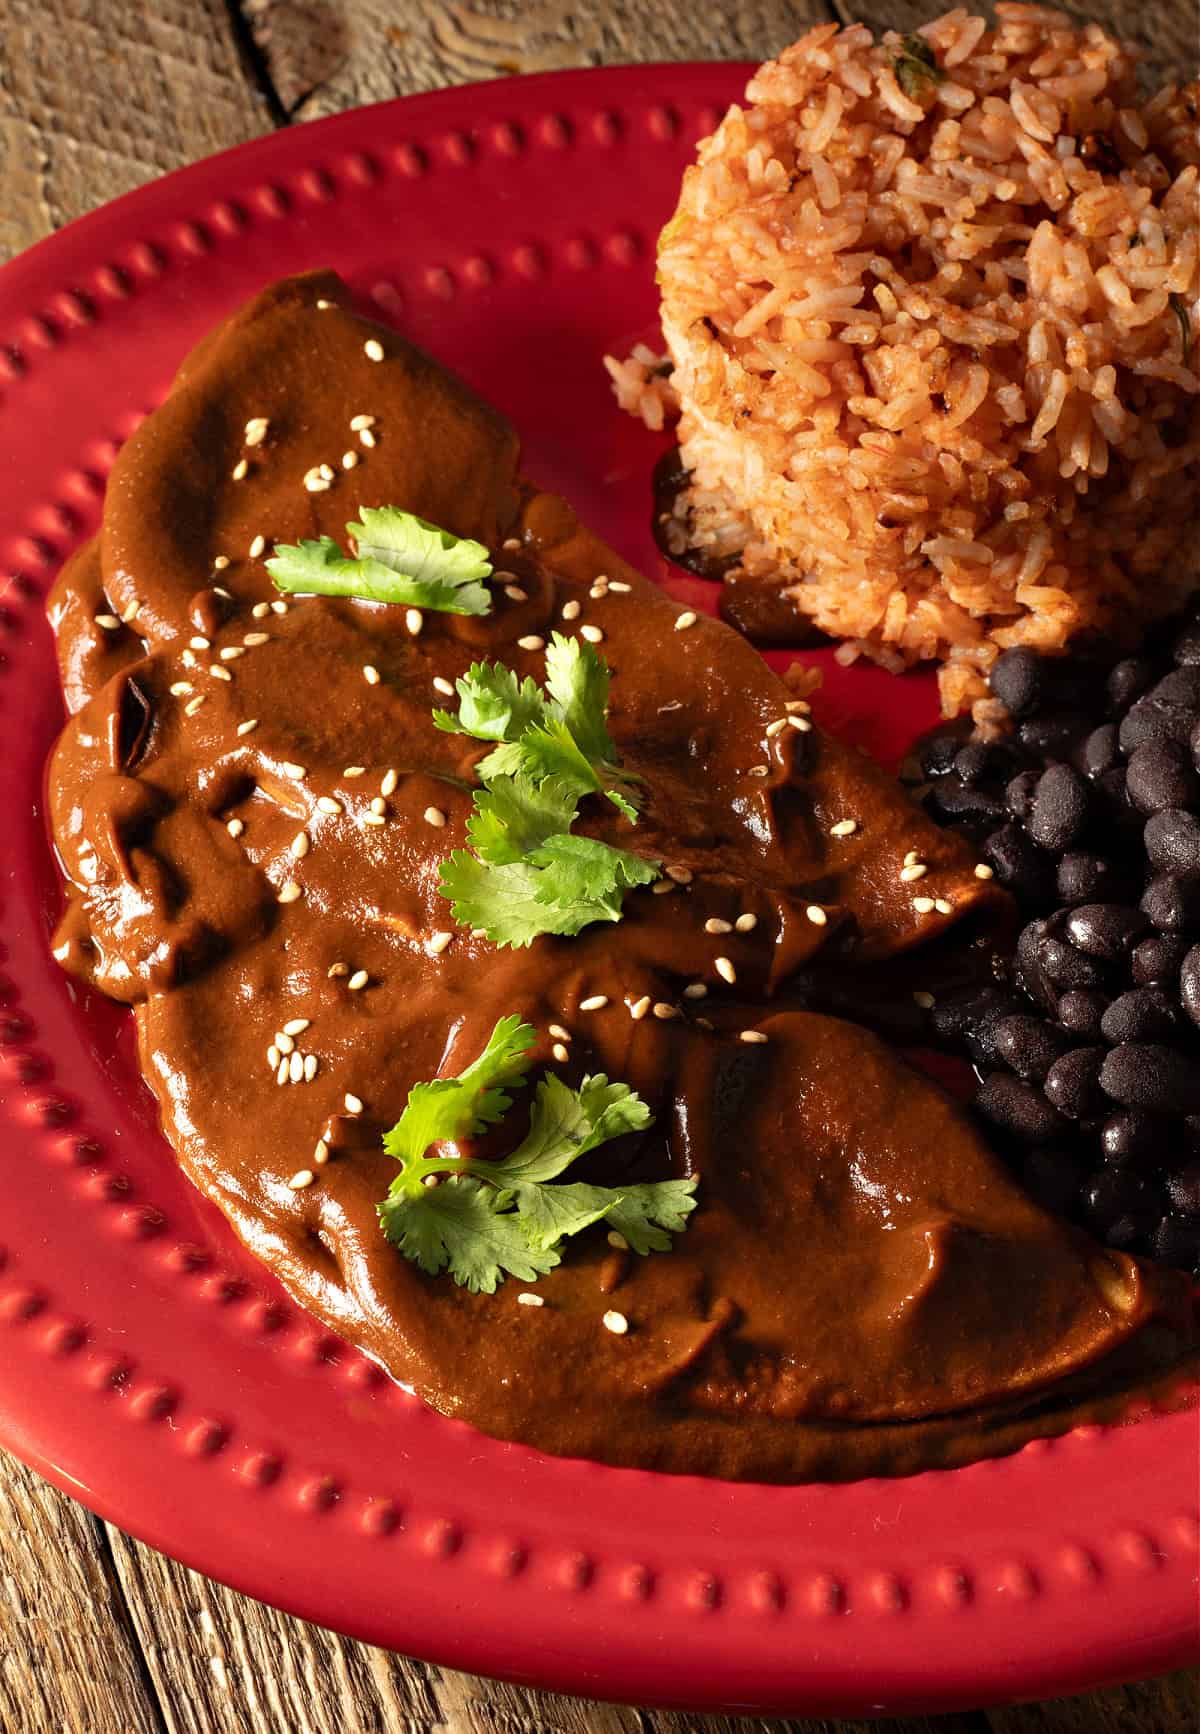 plate of beans, rice, and tortillas with vegan mole poblano